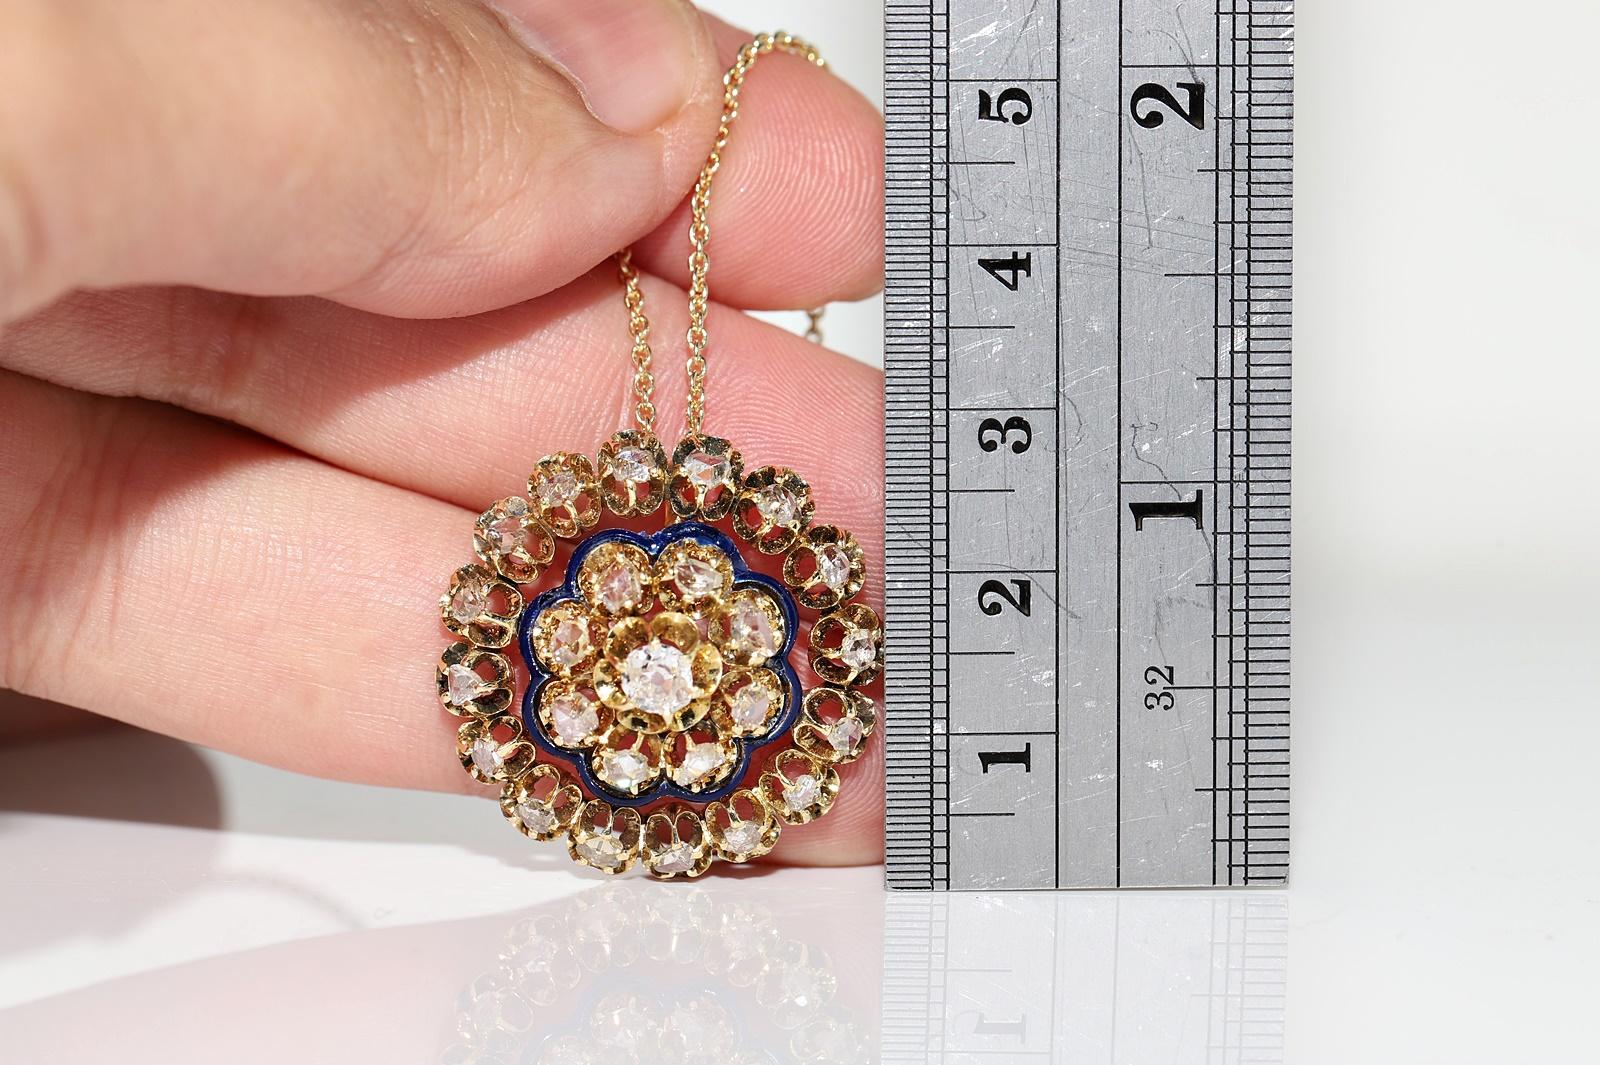 Antique Circa 1900s 18k Gold Natural Diamond And Enamel Pendant Necklace In Good Condition For Sale In Fatih/İstanbul, 34